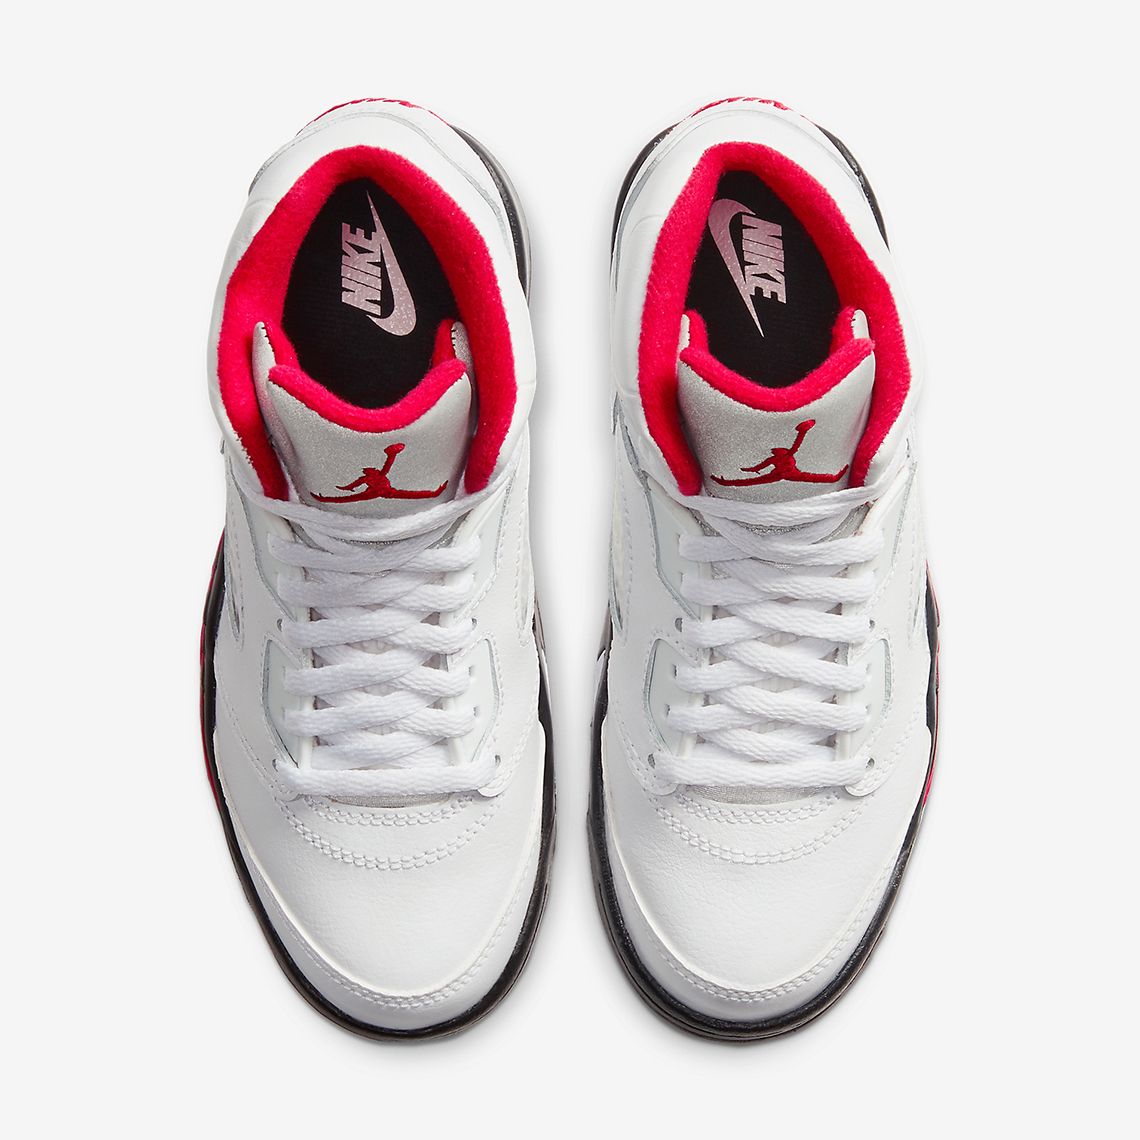 WINGS for the Jordan Brand 8×8 Collection Fire Red Ps 440889 102 4